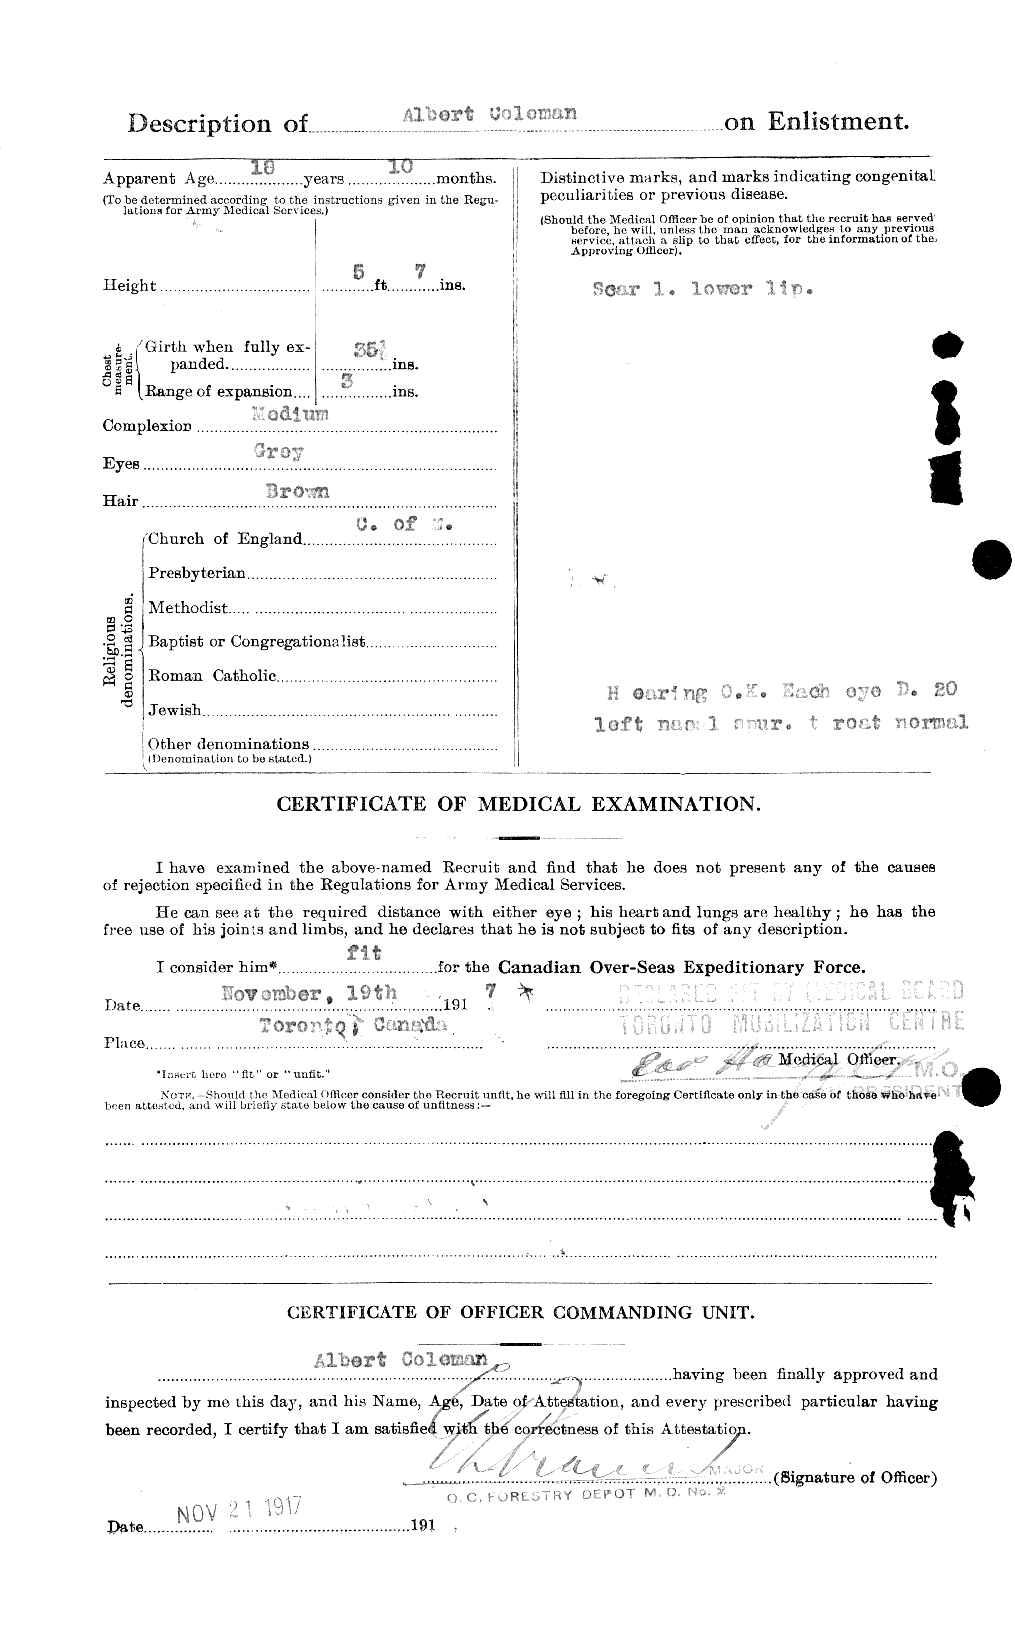 Personnel Records of the First World War - CEF 028047b